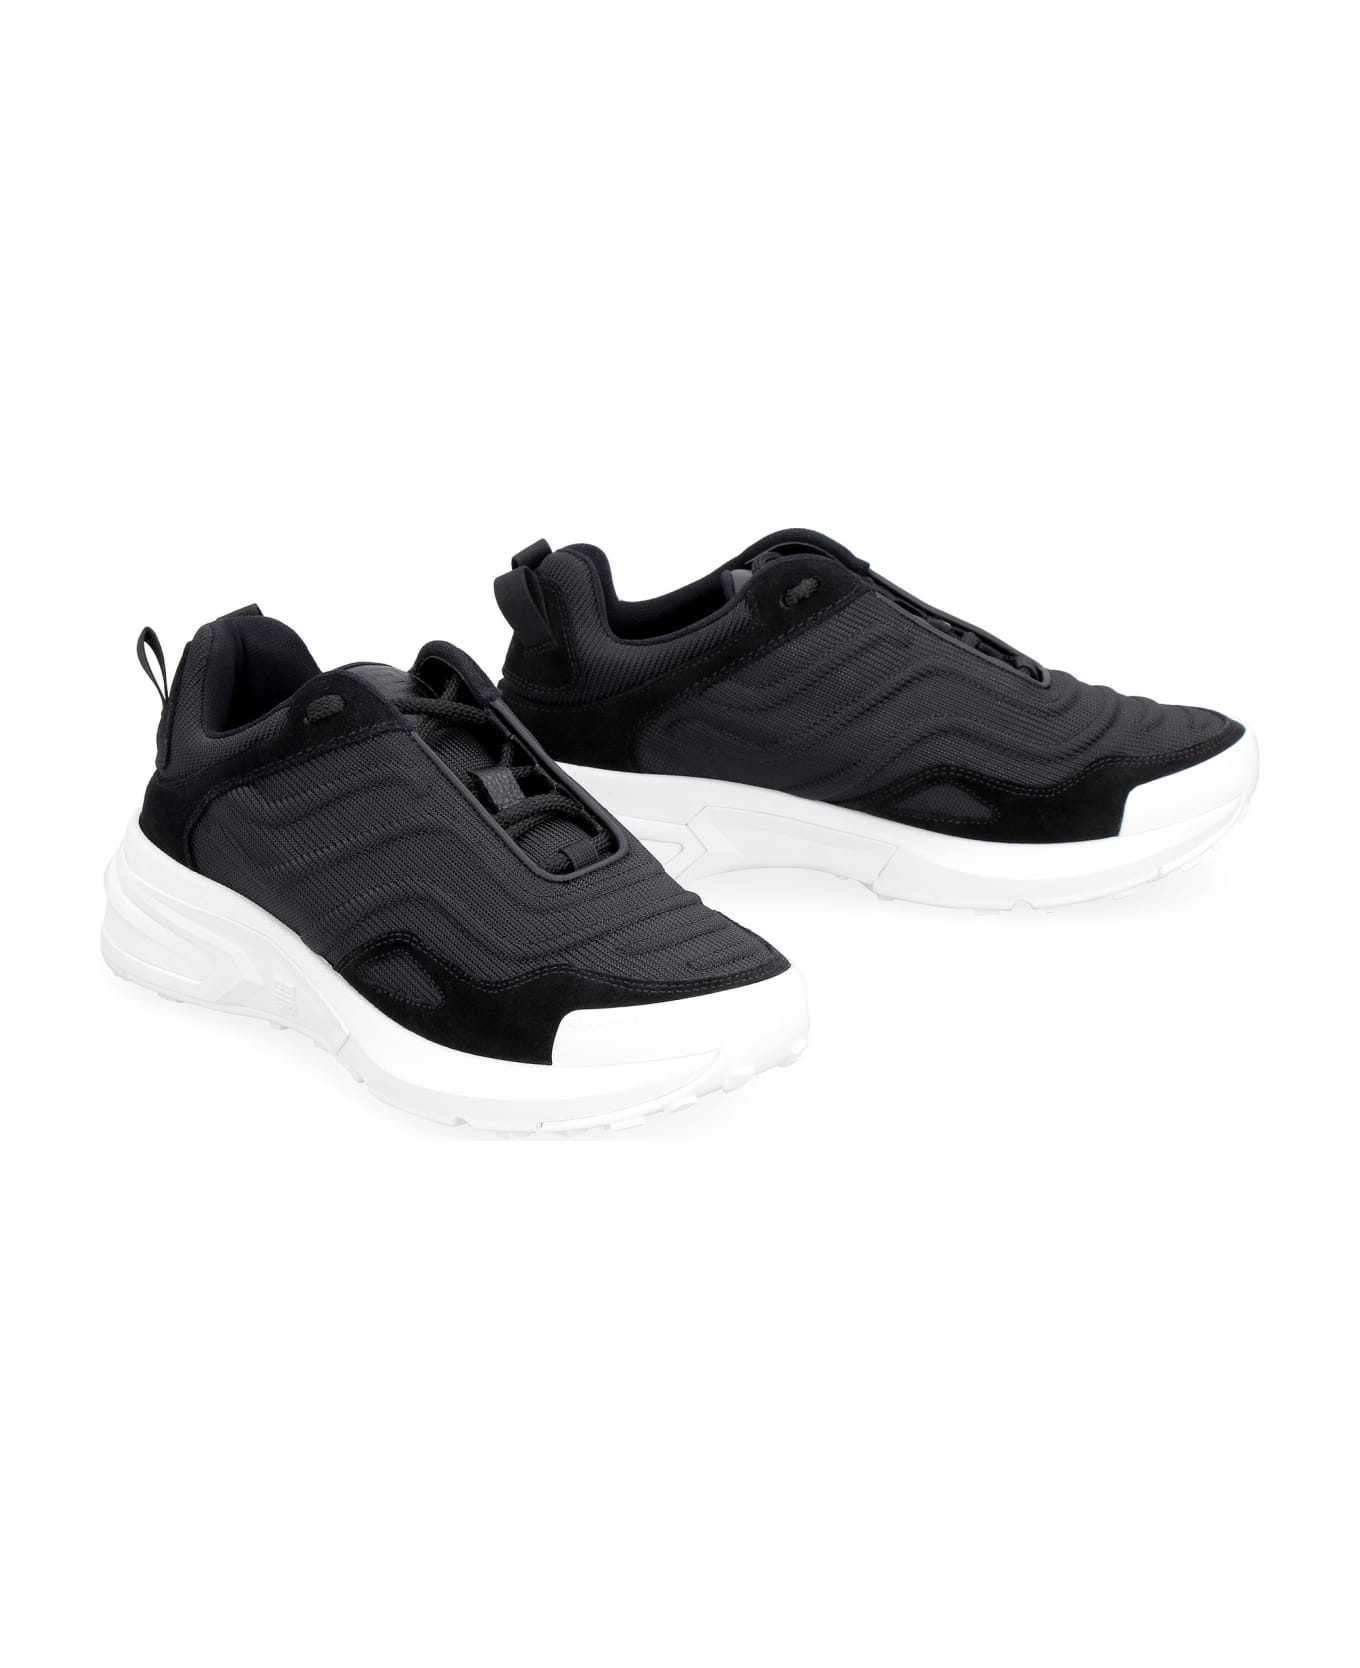 Givenchy Giv 1 Light Low-top Sneakers - black